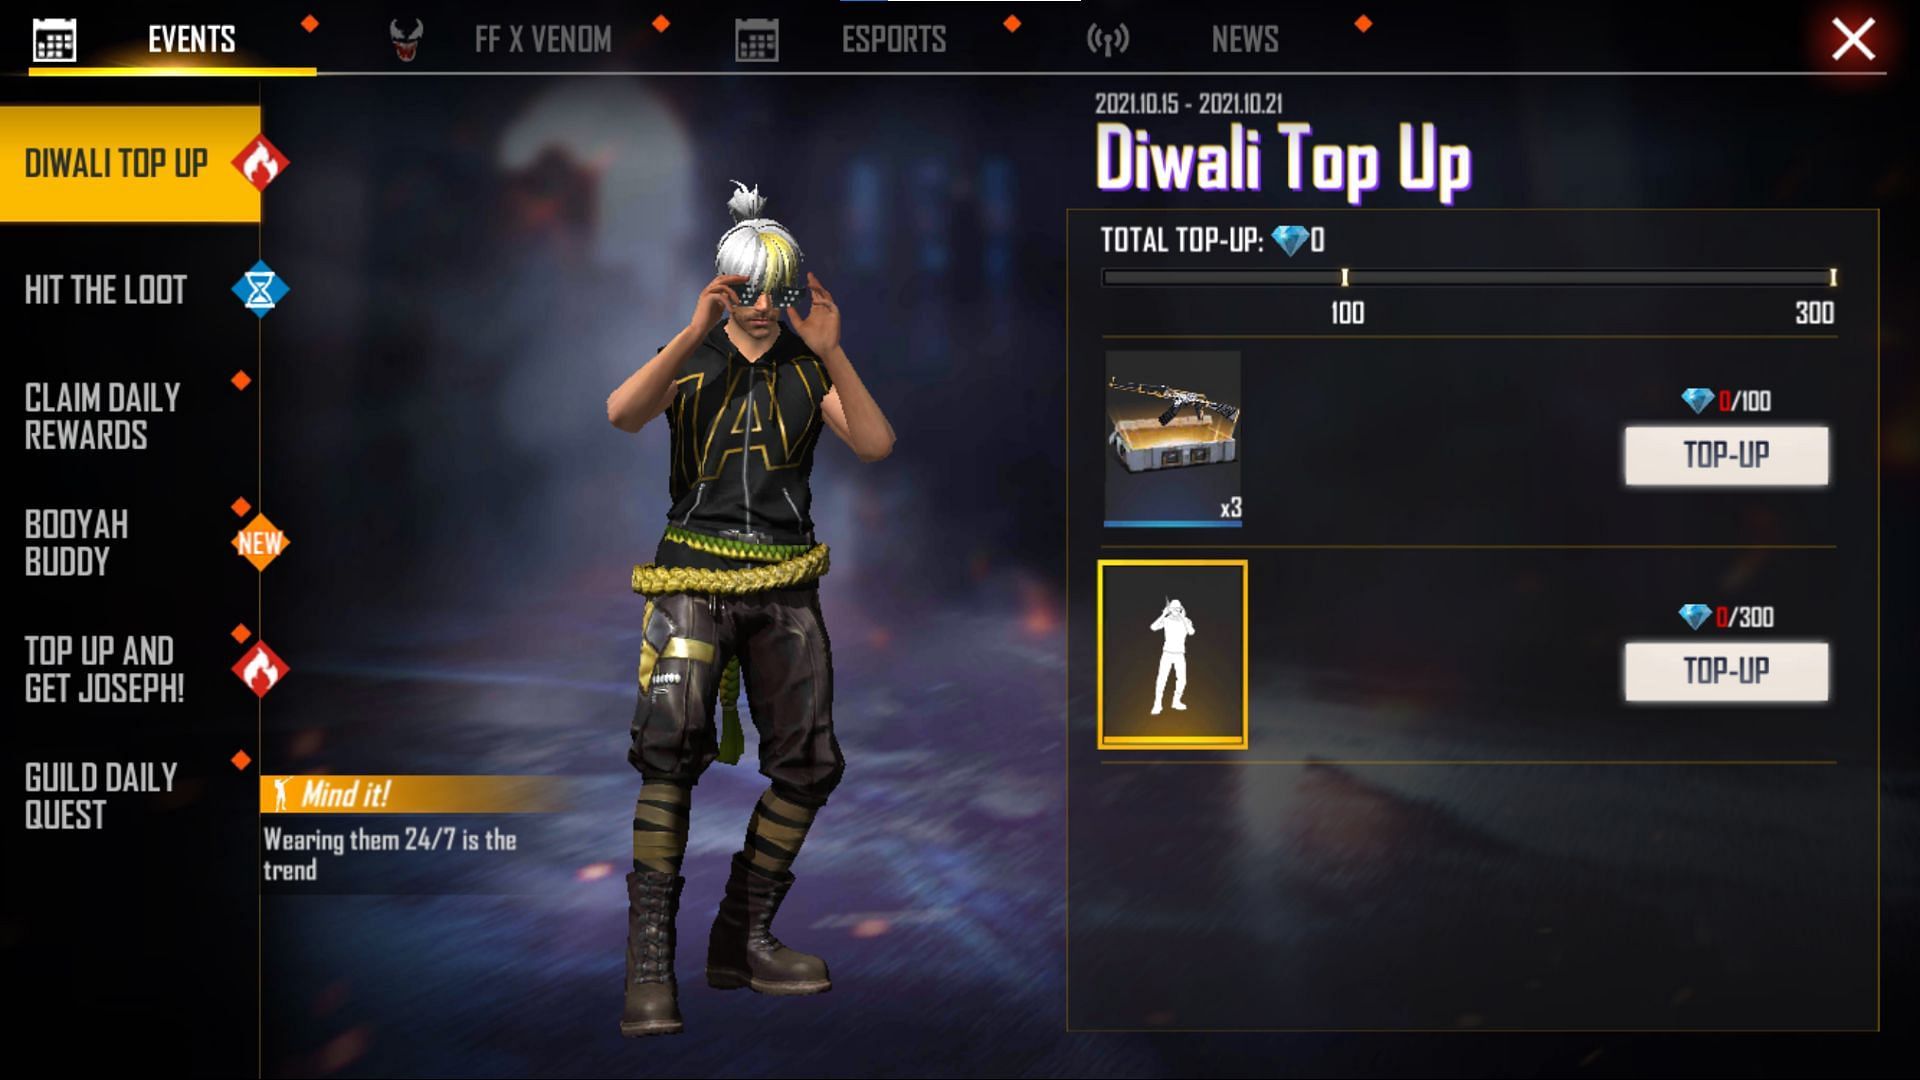 Mind It can be attained from Top Up event (Image via Free Fire Max)